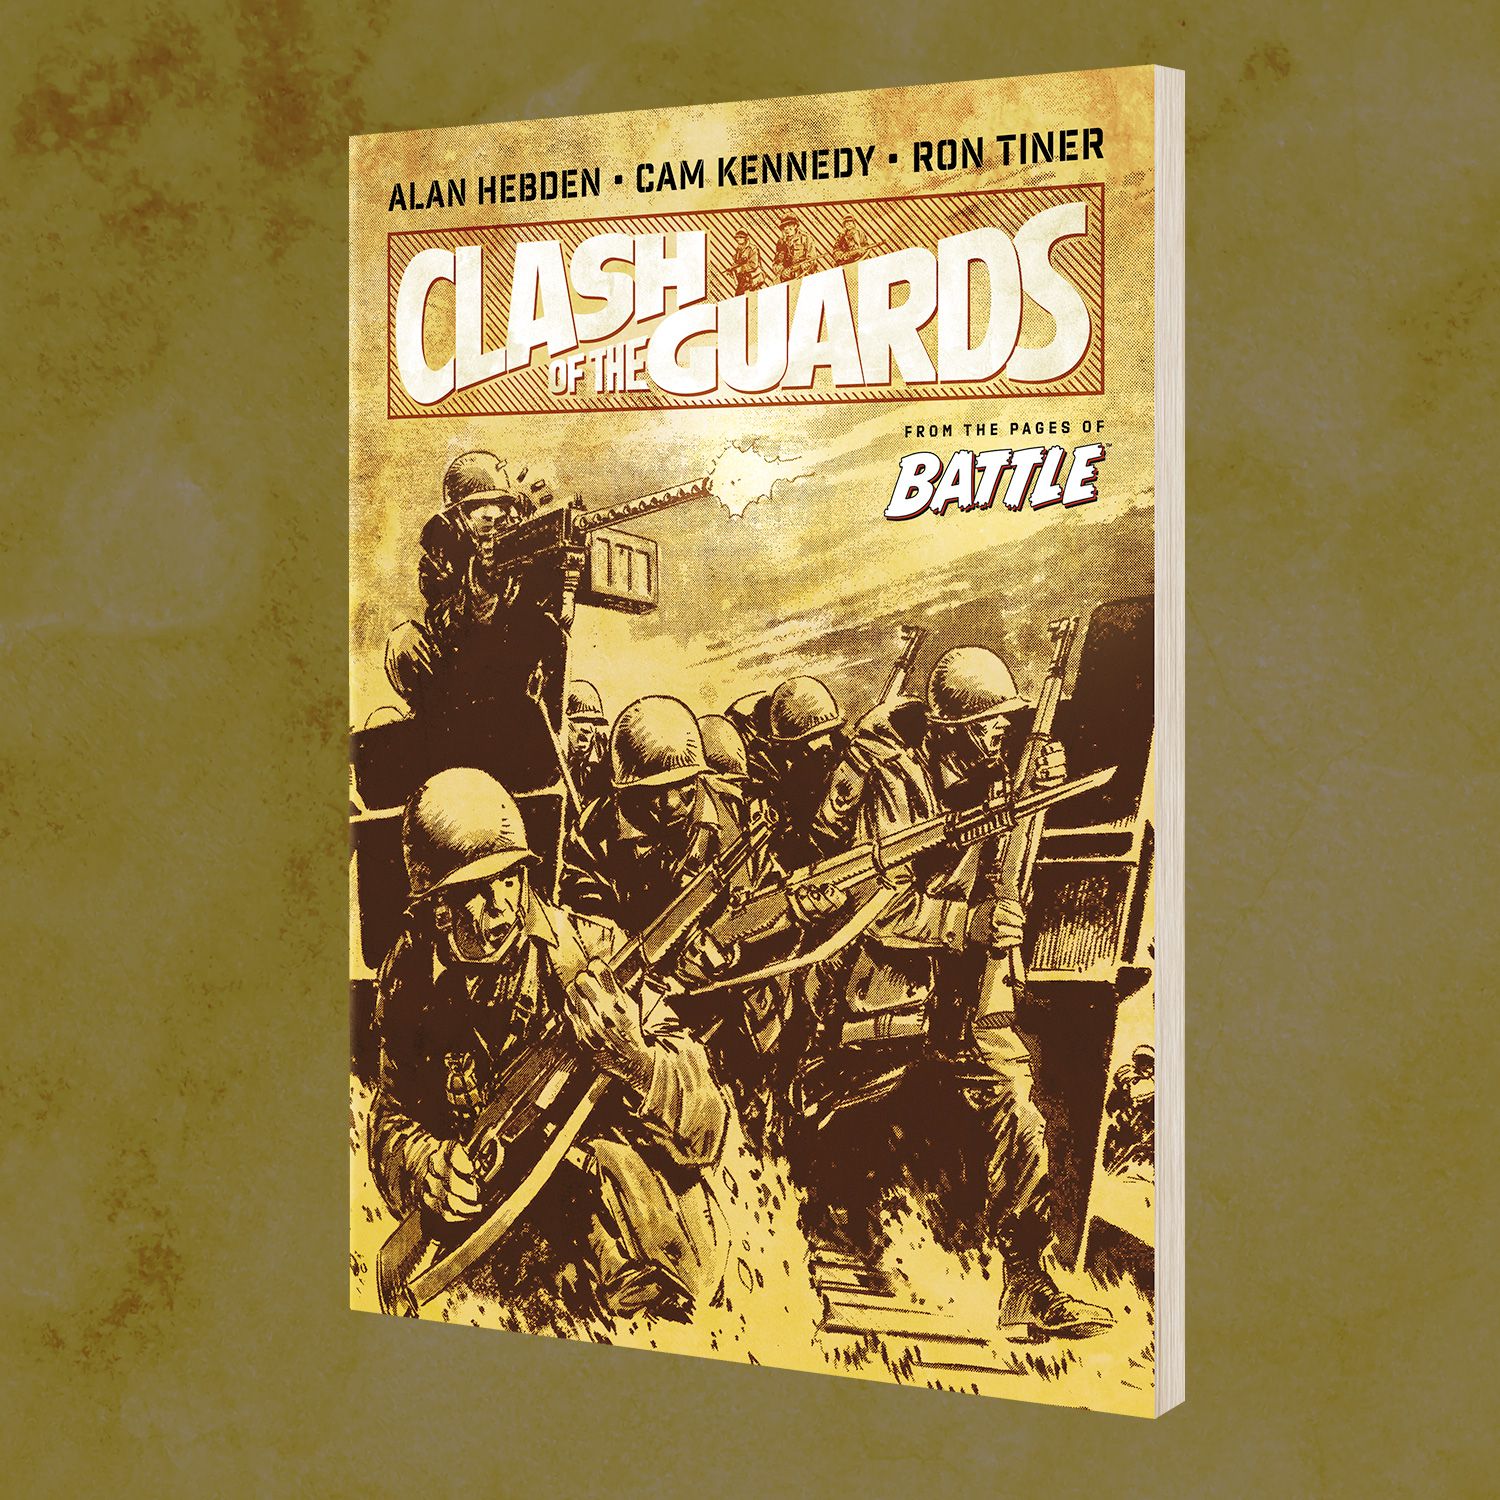 Alan Hebden signing ‘Clash of the Guards’ – 15 July